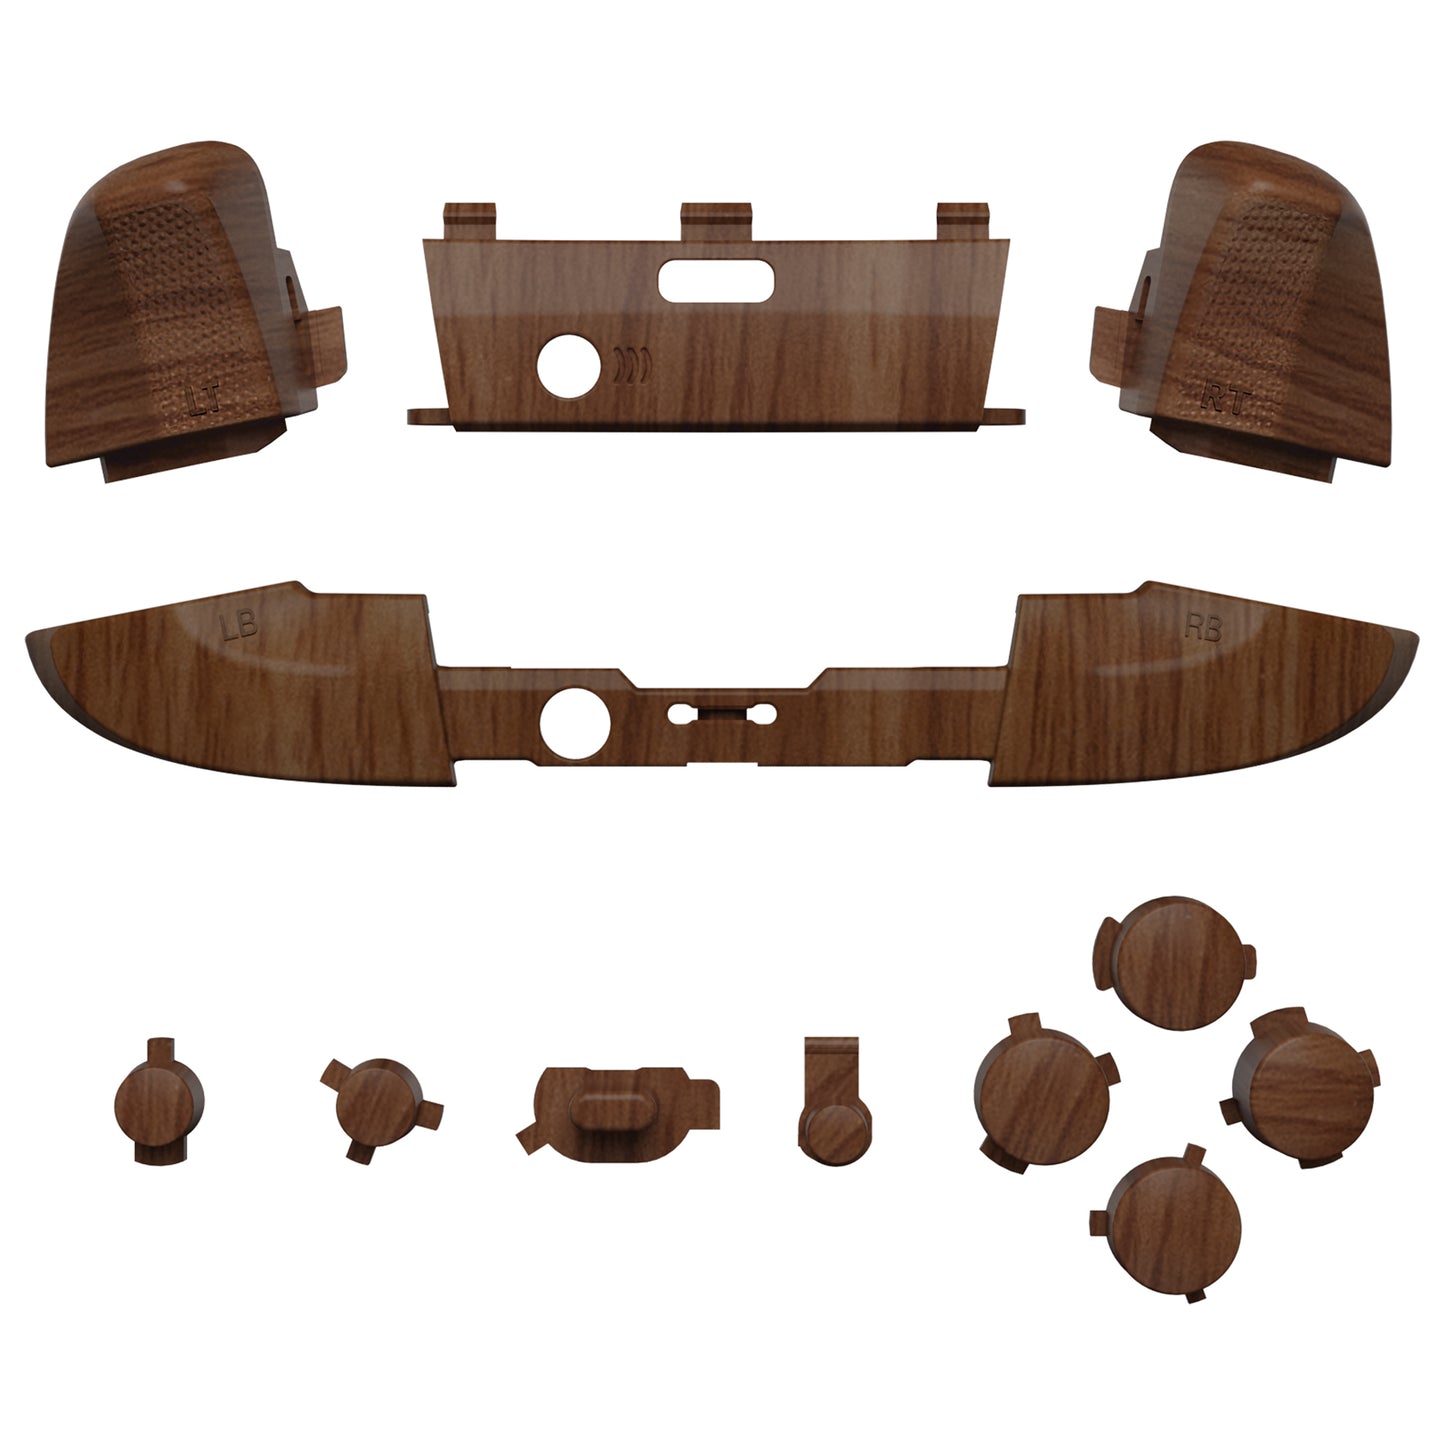 eXtremeRate Replacement Buttons Kit for Xbox One Elite Series 2  & Elite 2 Core Controller - Wood Grain